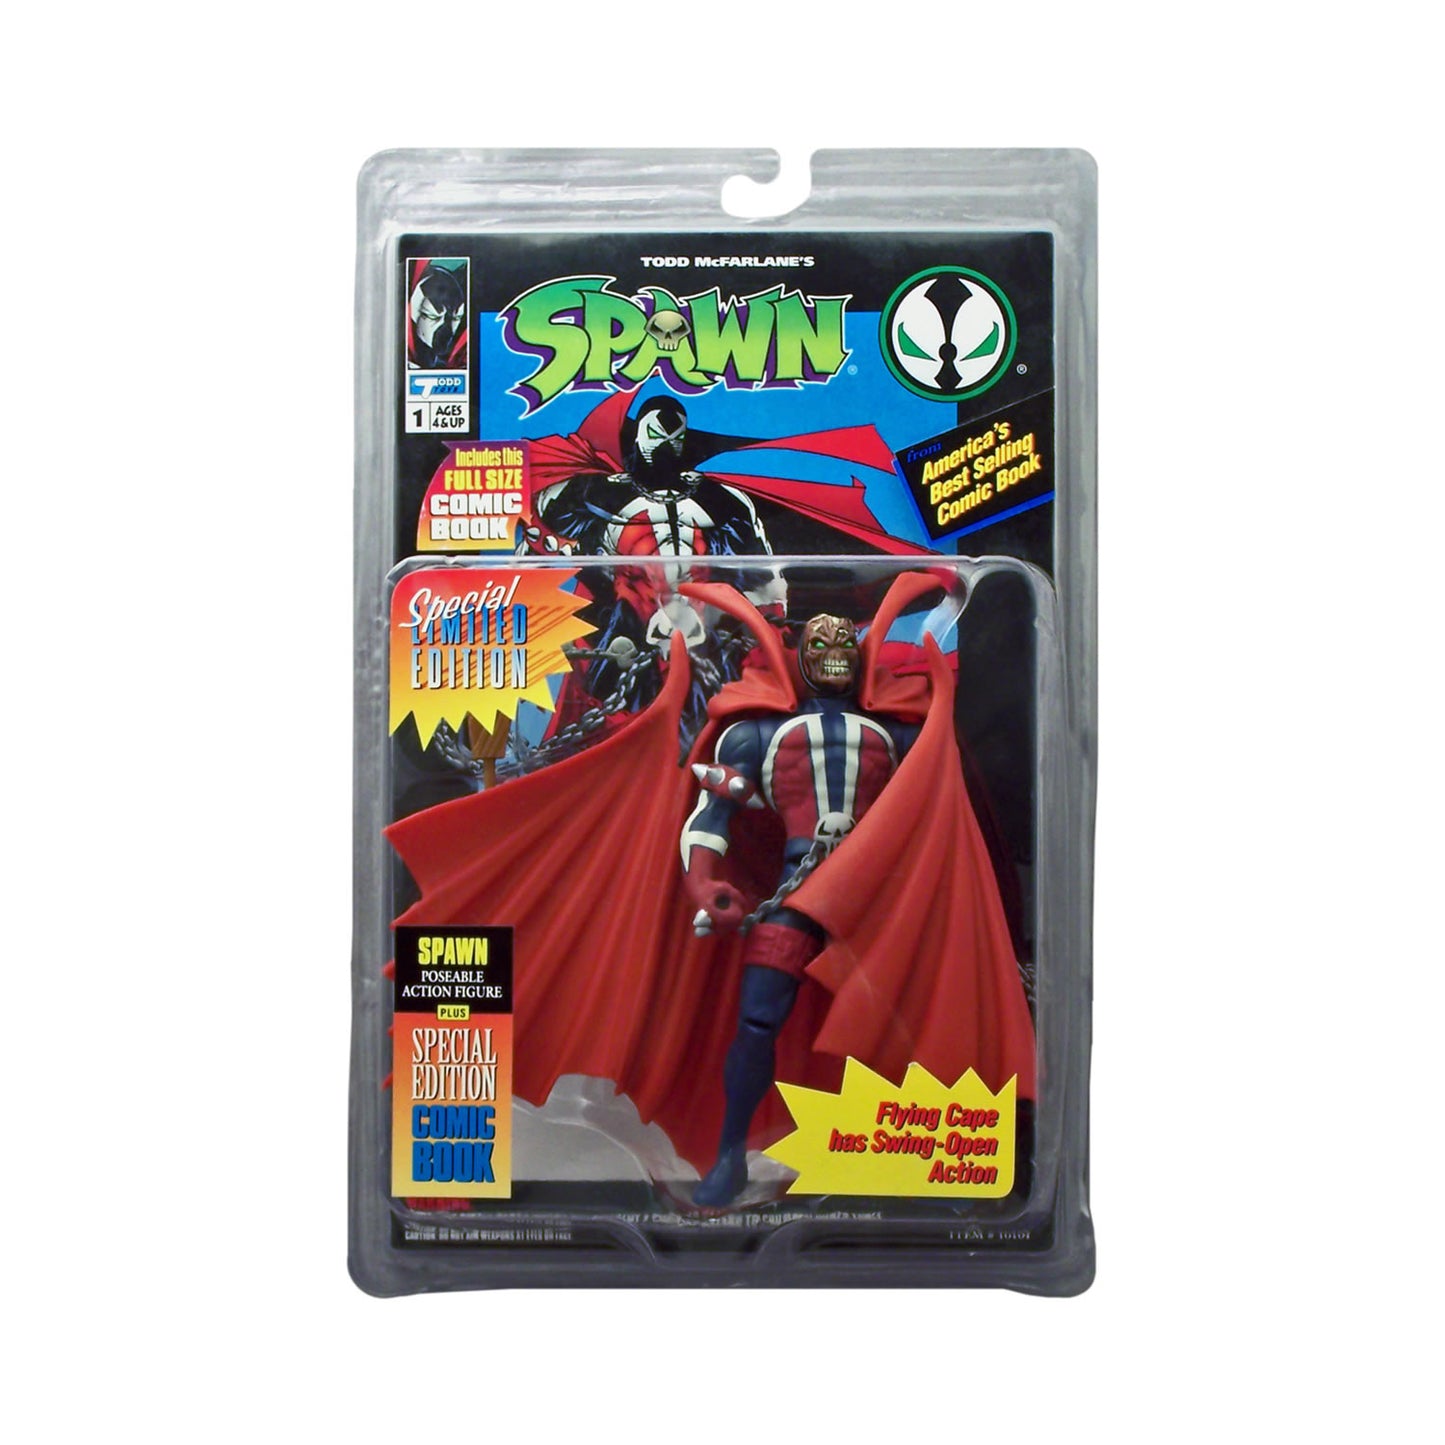 1st Special Edition "Hamburger-faced" Spawn Action Figure